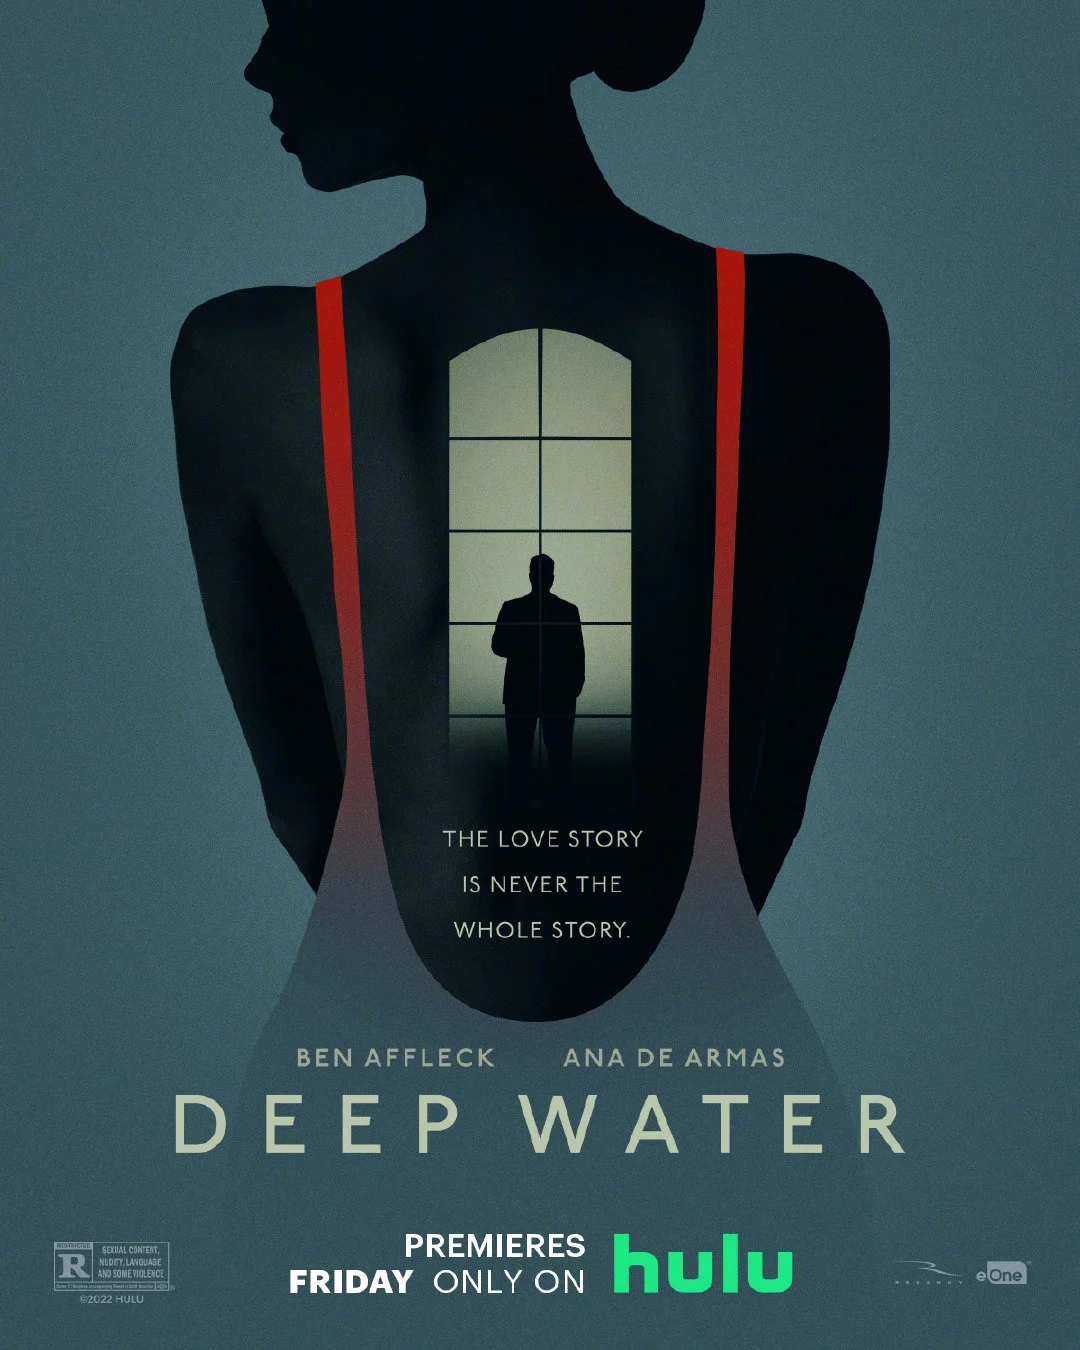 Some posters for "Deep Water" ​​​